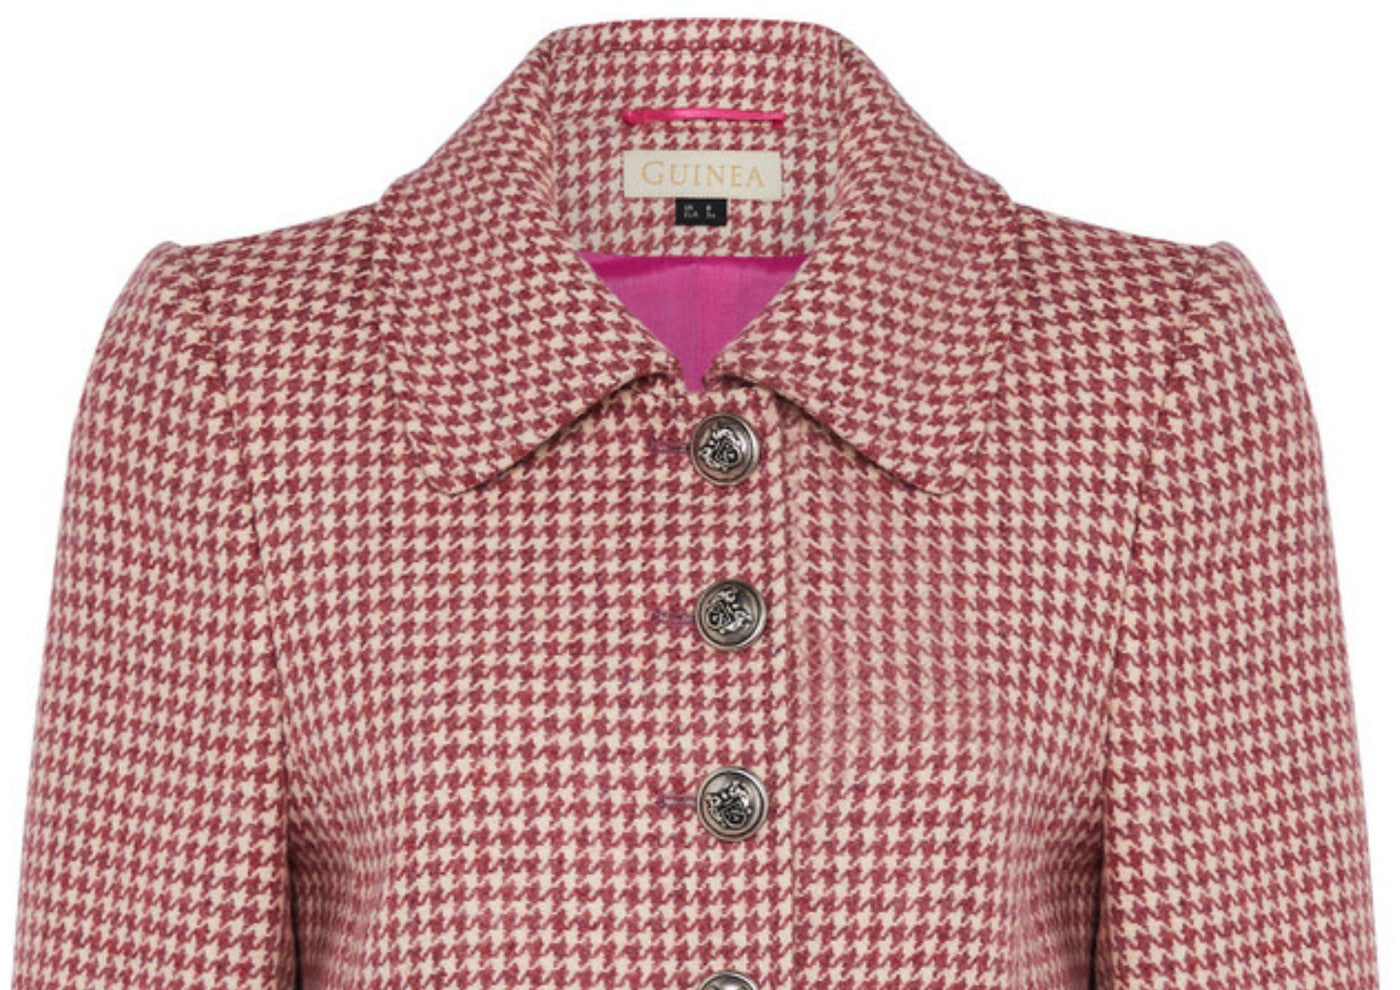 Guinea's Brompton single breasted wool coat in a red and cream houndstooth pattern.